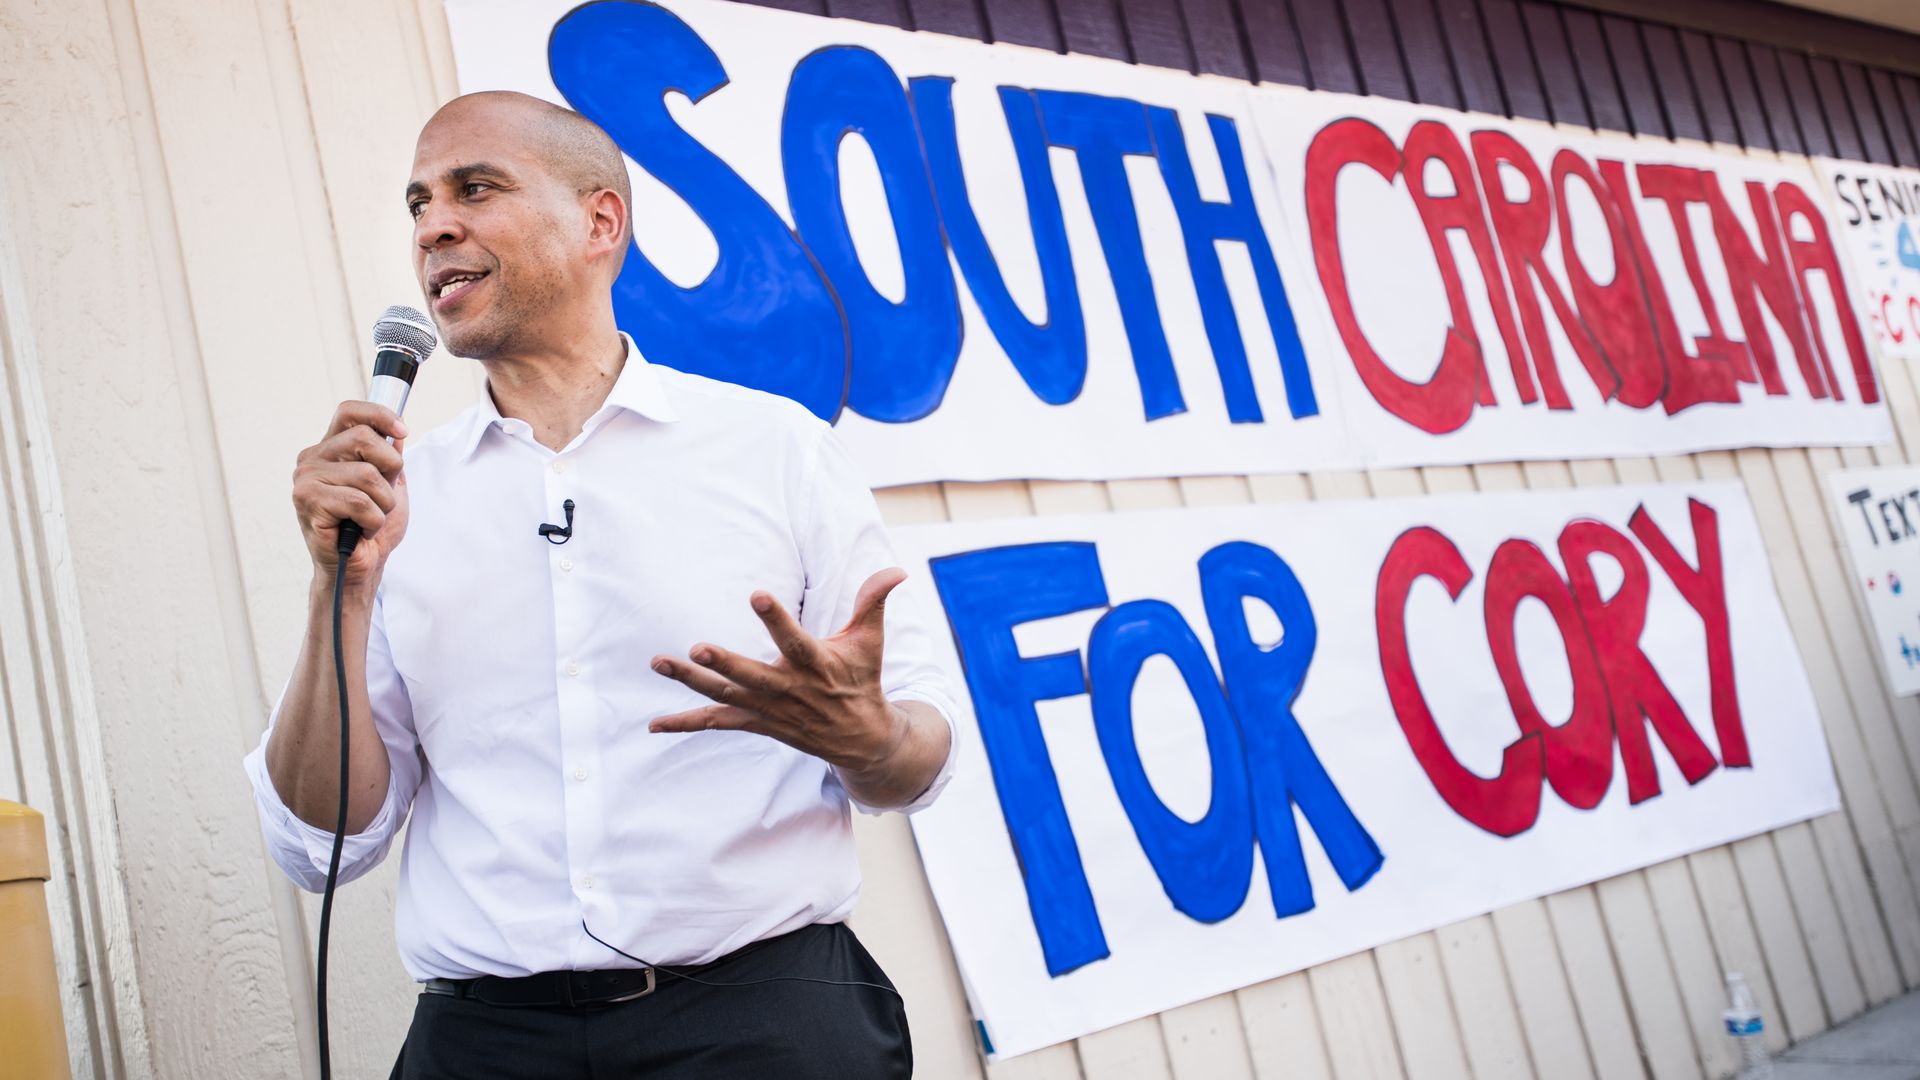 Cory Booker holds a microphone and stands in front of a sign that says "South Carolina for Cory."